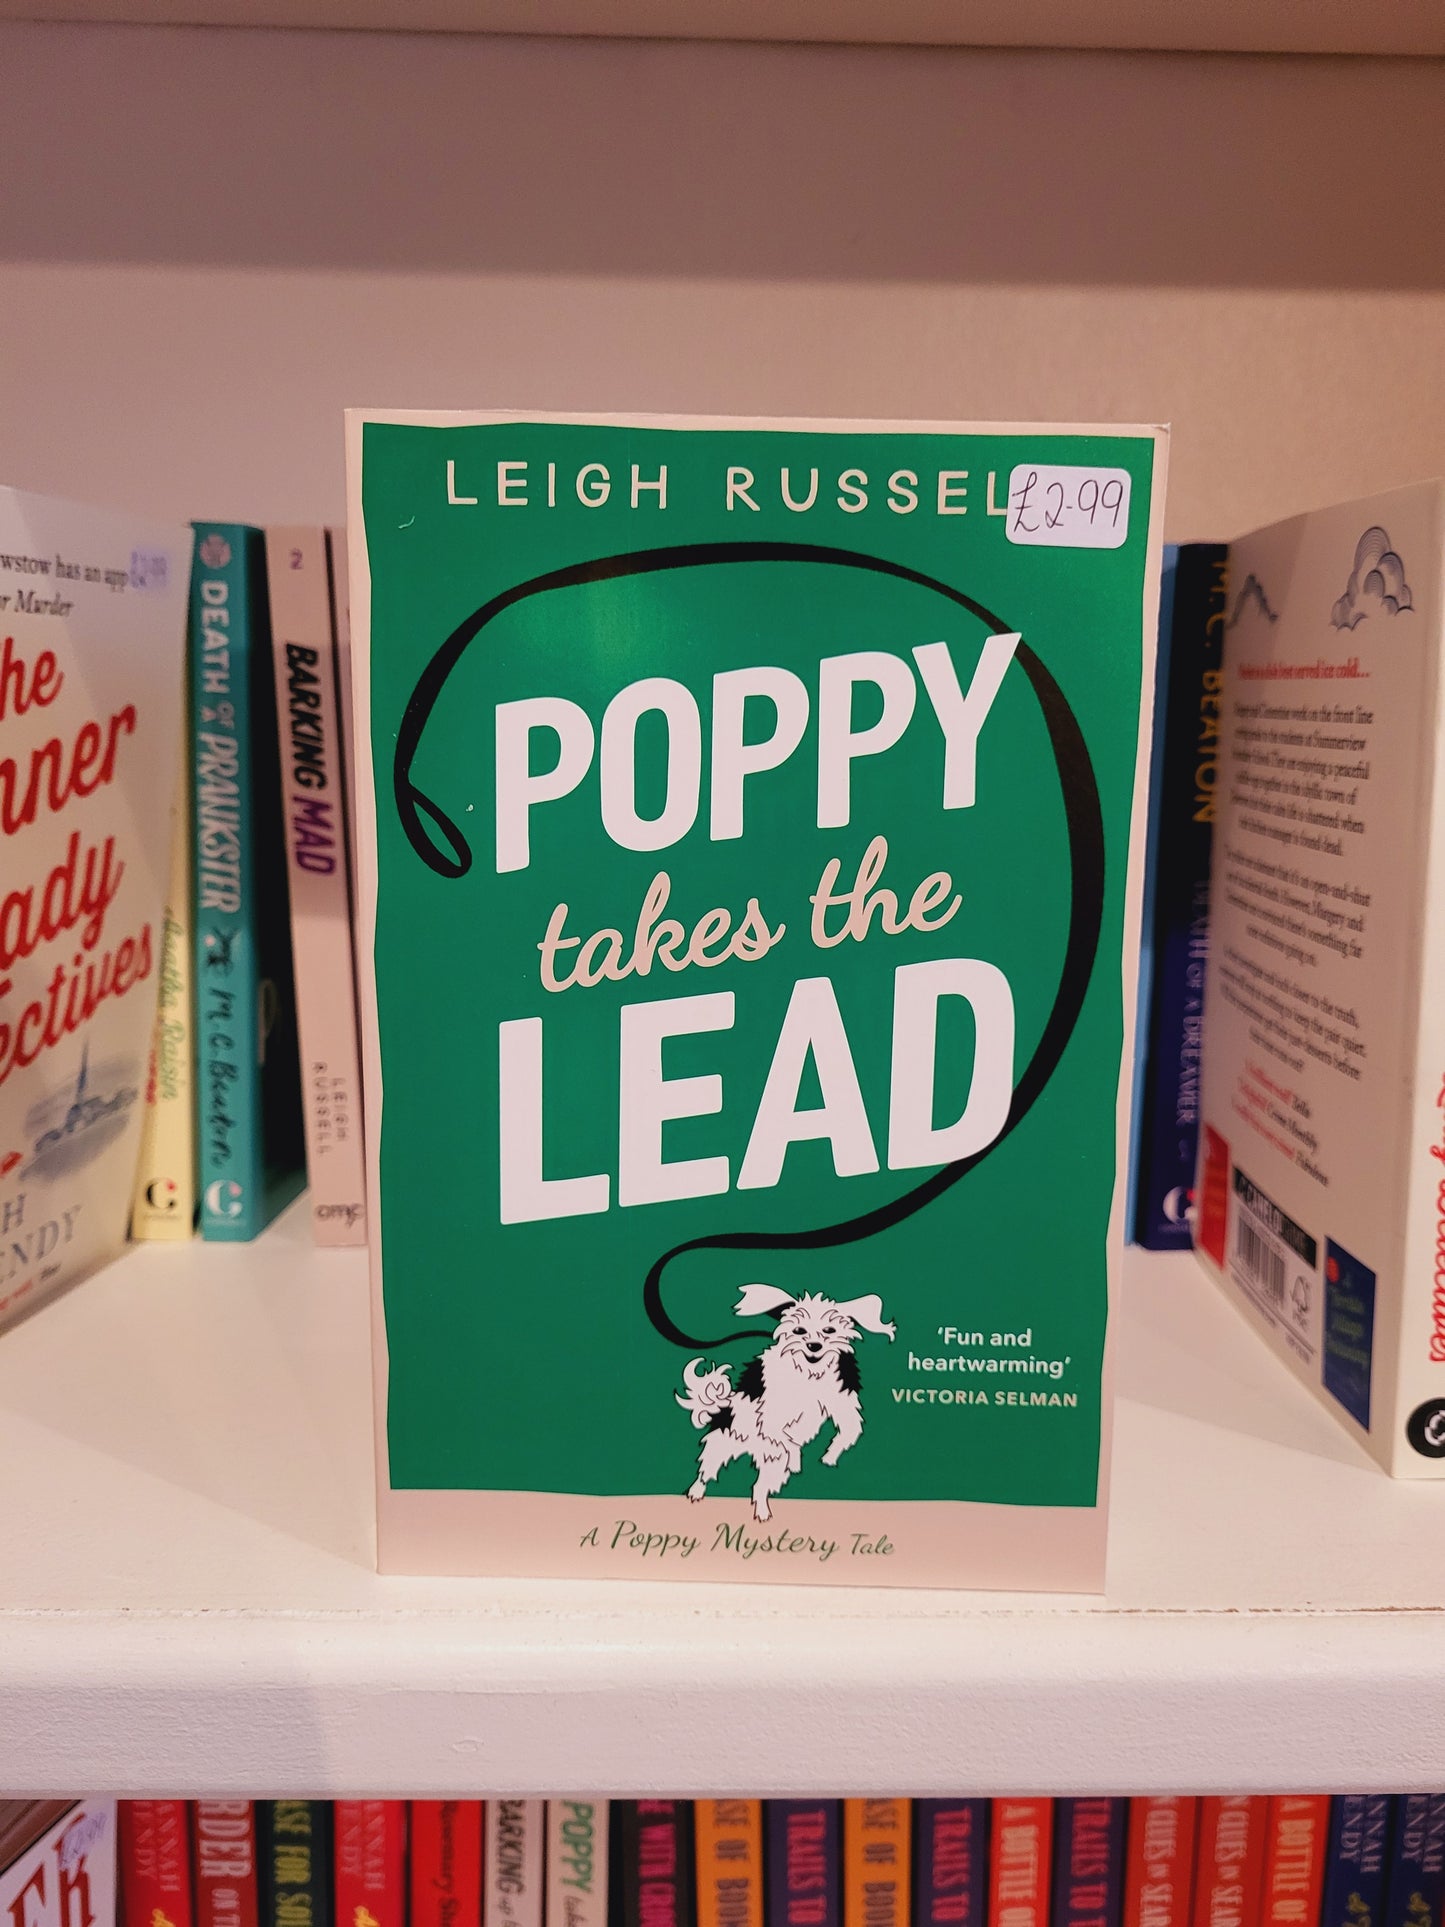 Poppy Takes the Lead - Leigh Russell